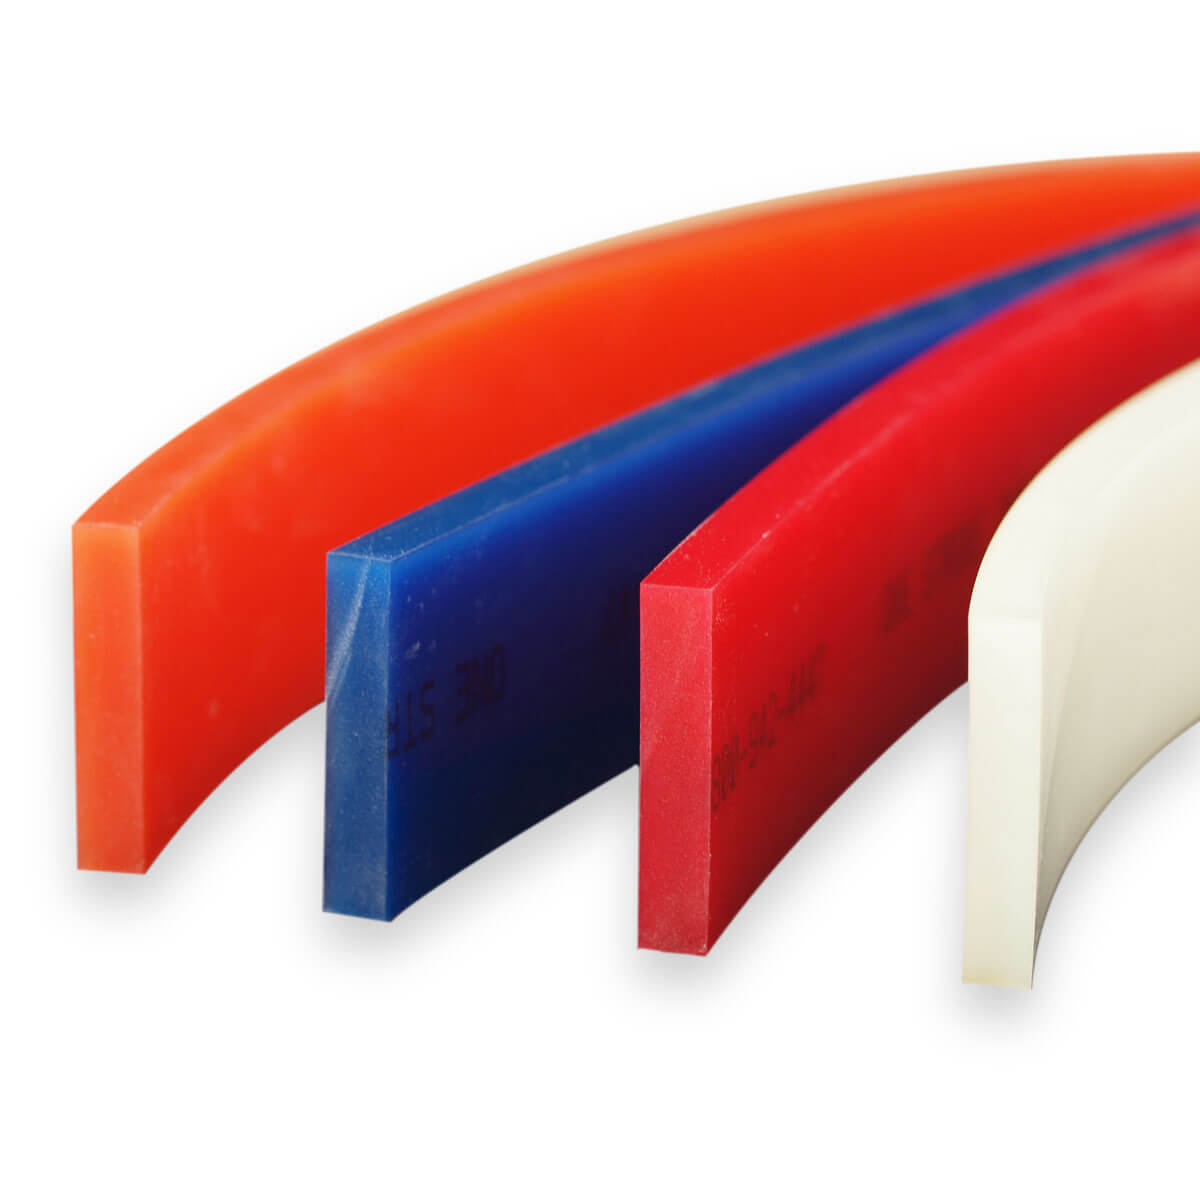 Squeegee Silicone Rubber Tool for silk screen stencils paint and more